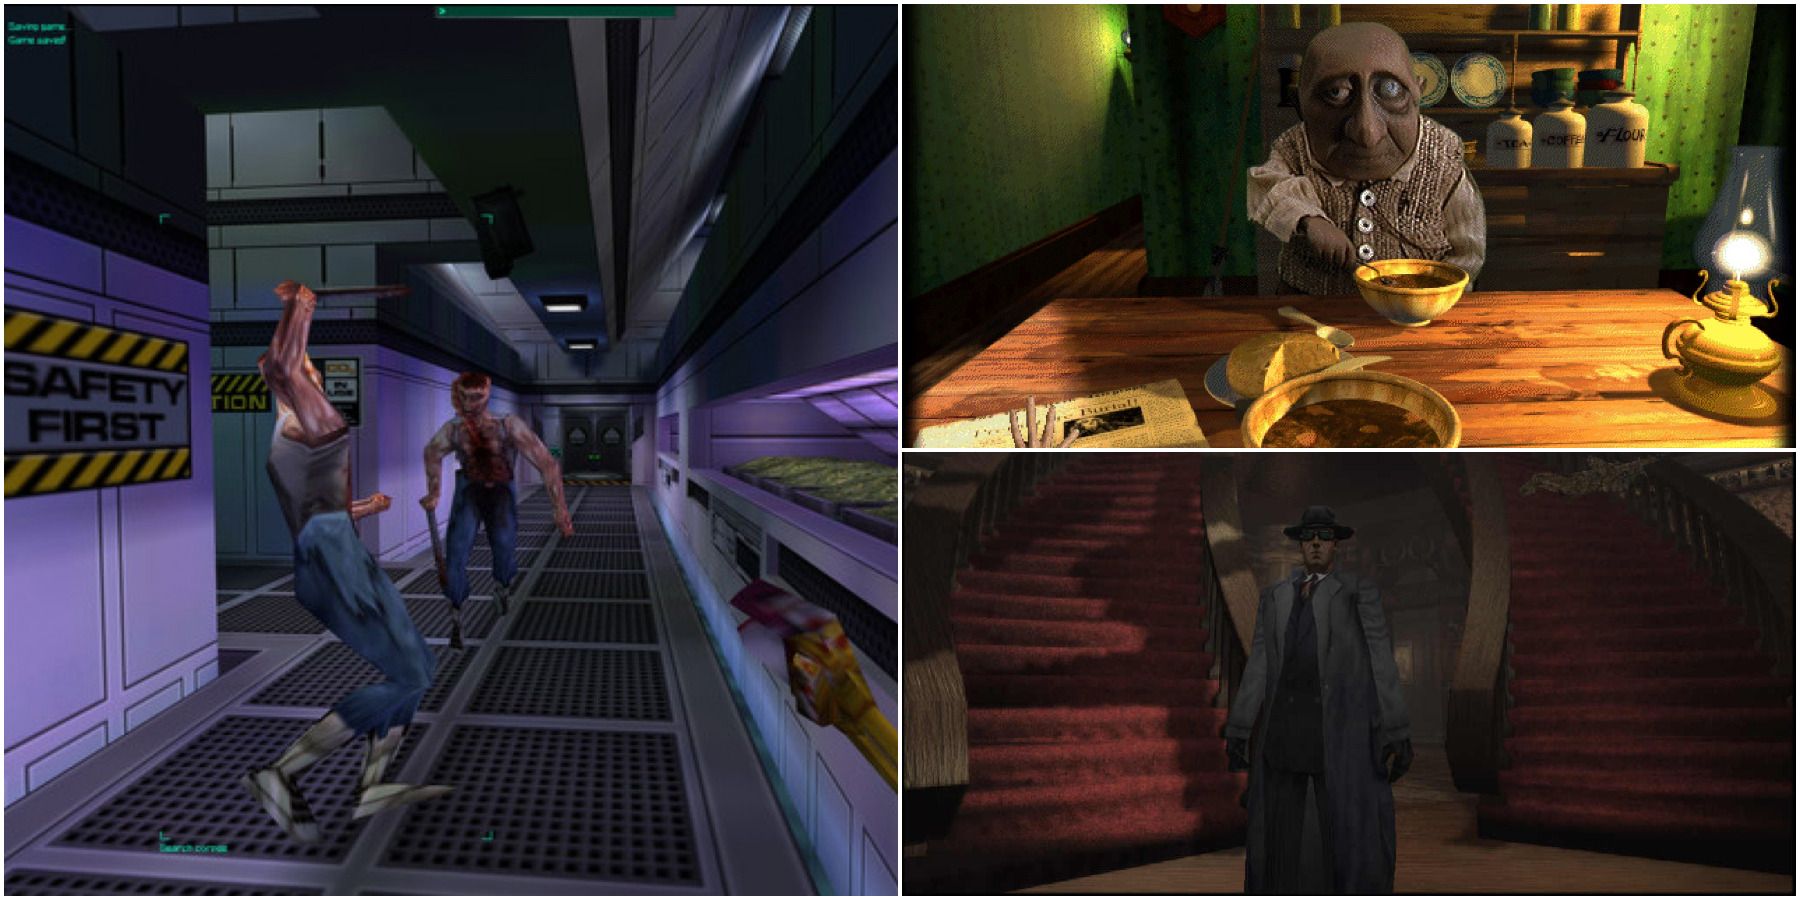 A 1990s-style horror game that draws attention to the scenario